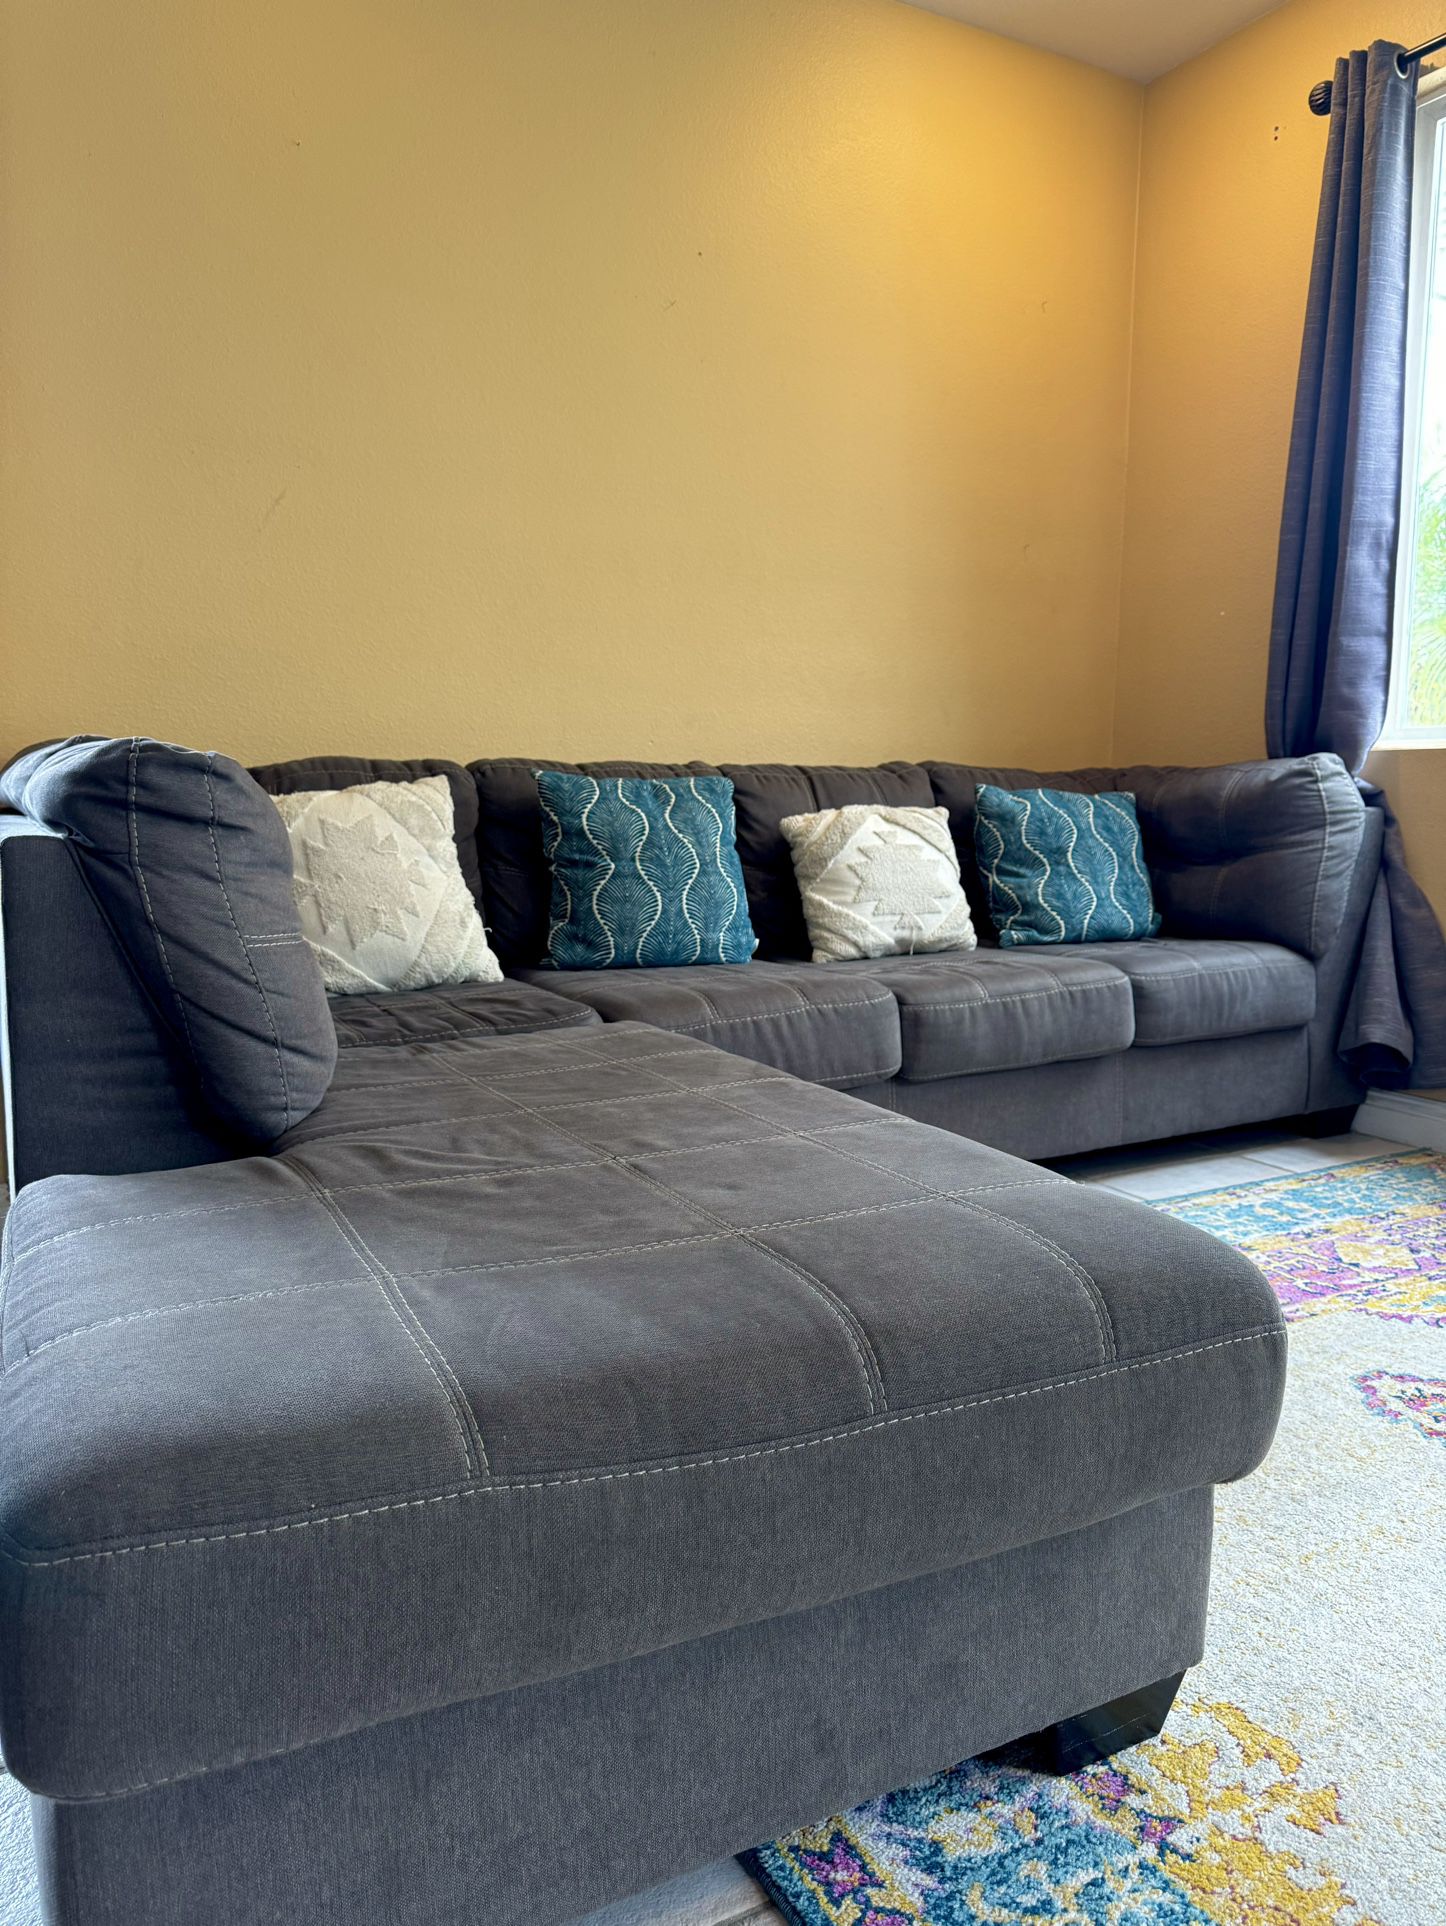 Modern Sectional Sofa: Cozy Comfort - Gently Used